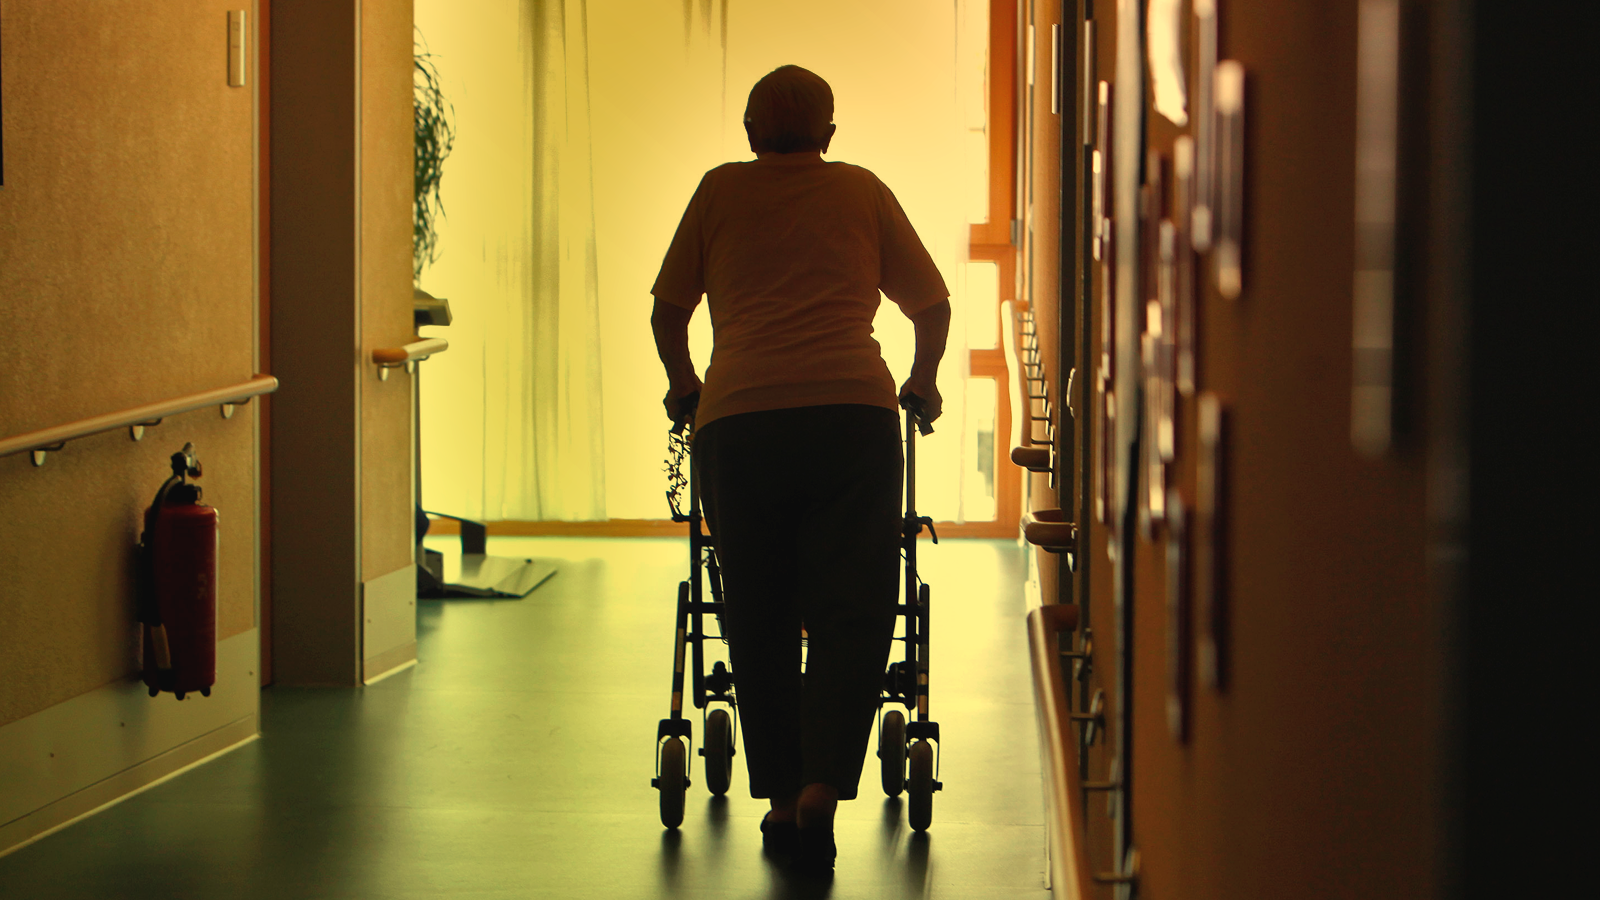 An elderly person uses a walker in the hallway of a nursing home.